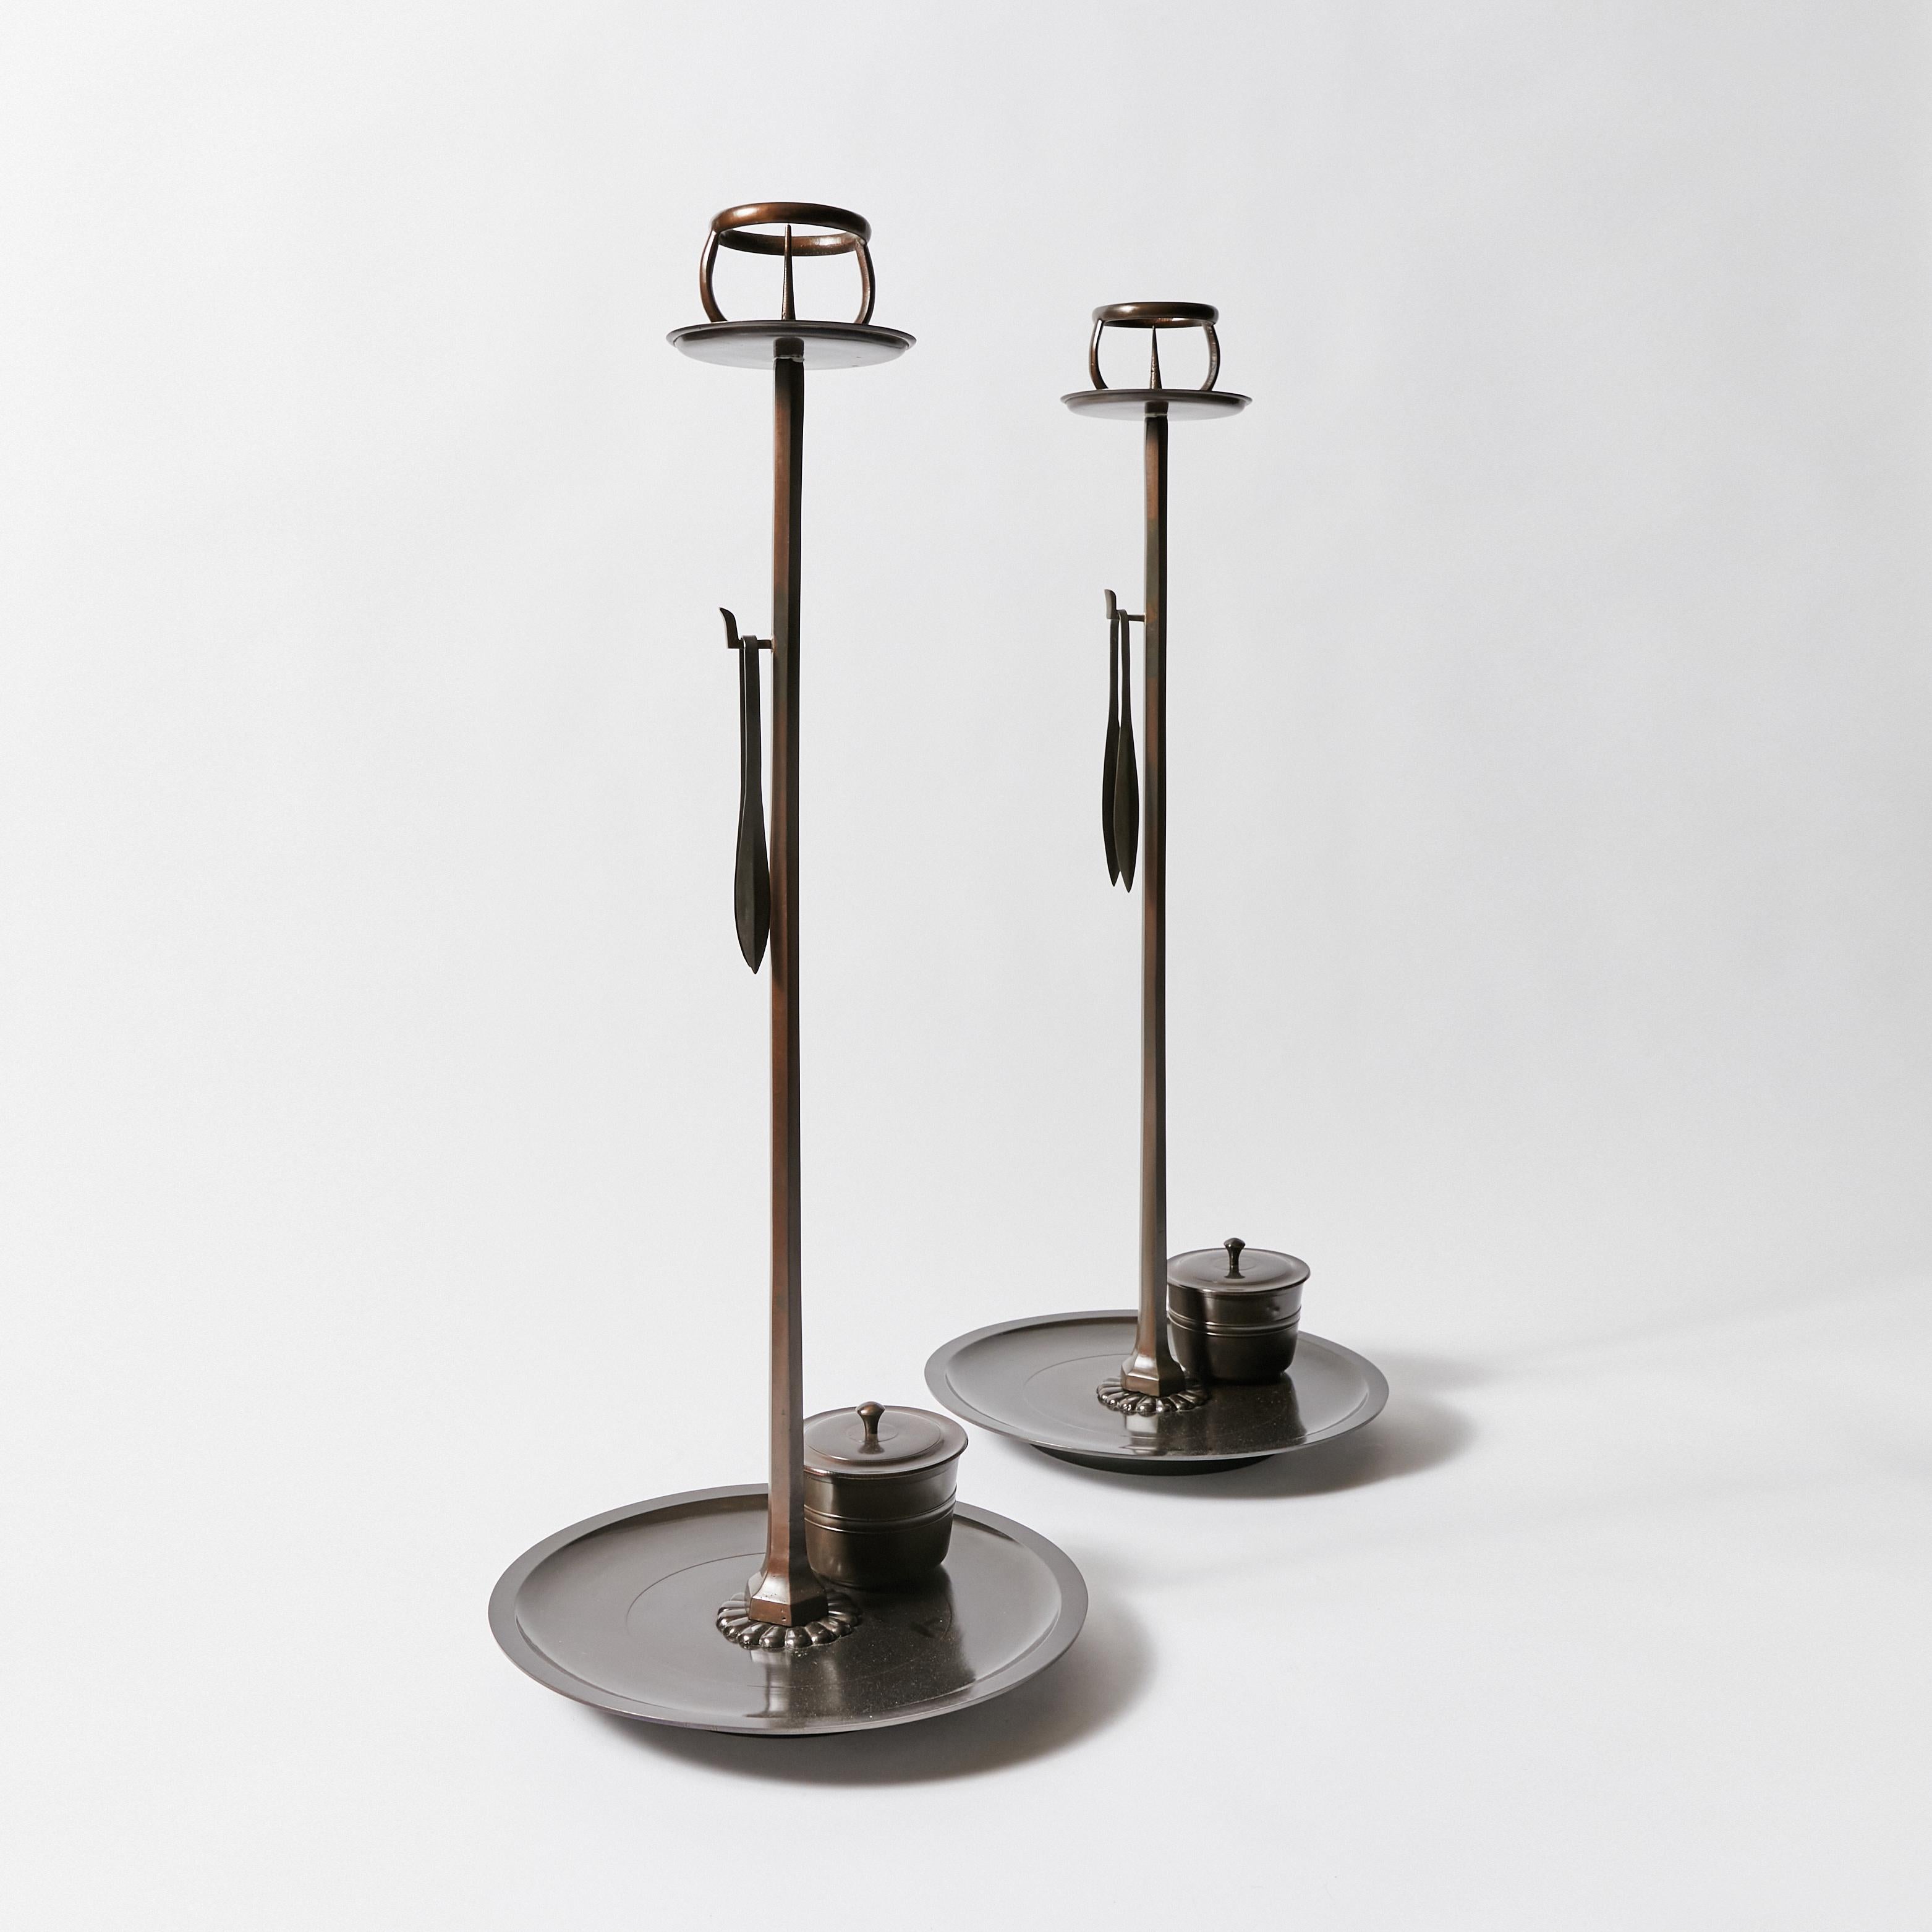 Set of two antique Shokudai candle stands. Made in bronze.